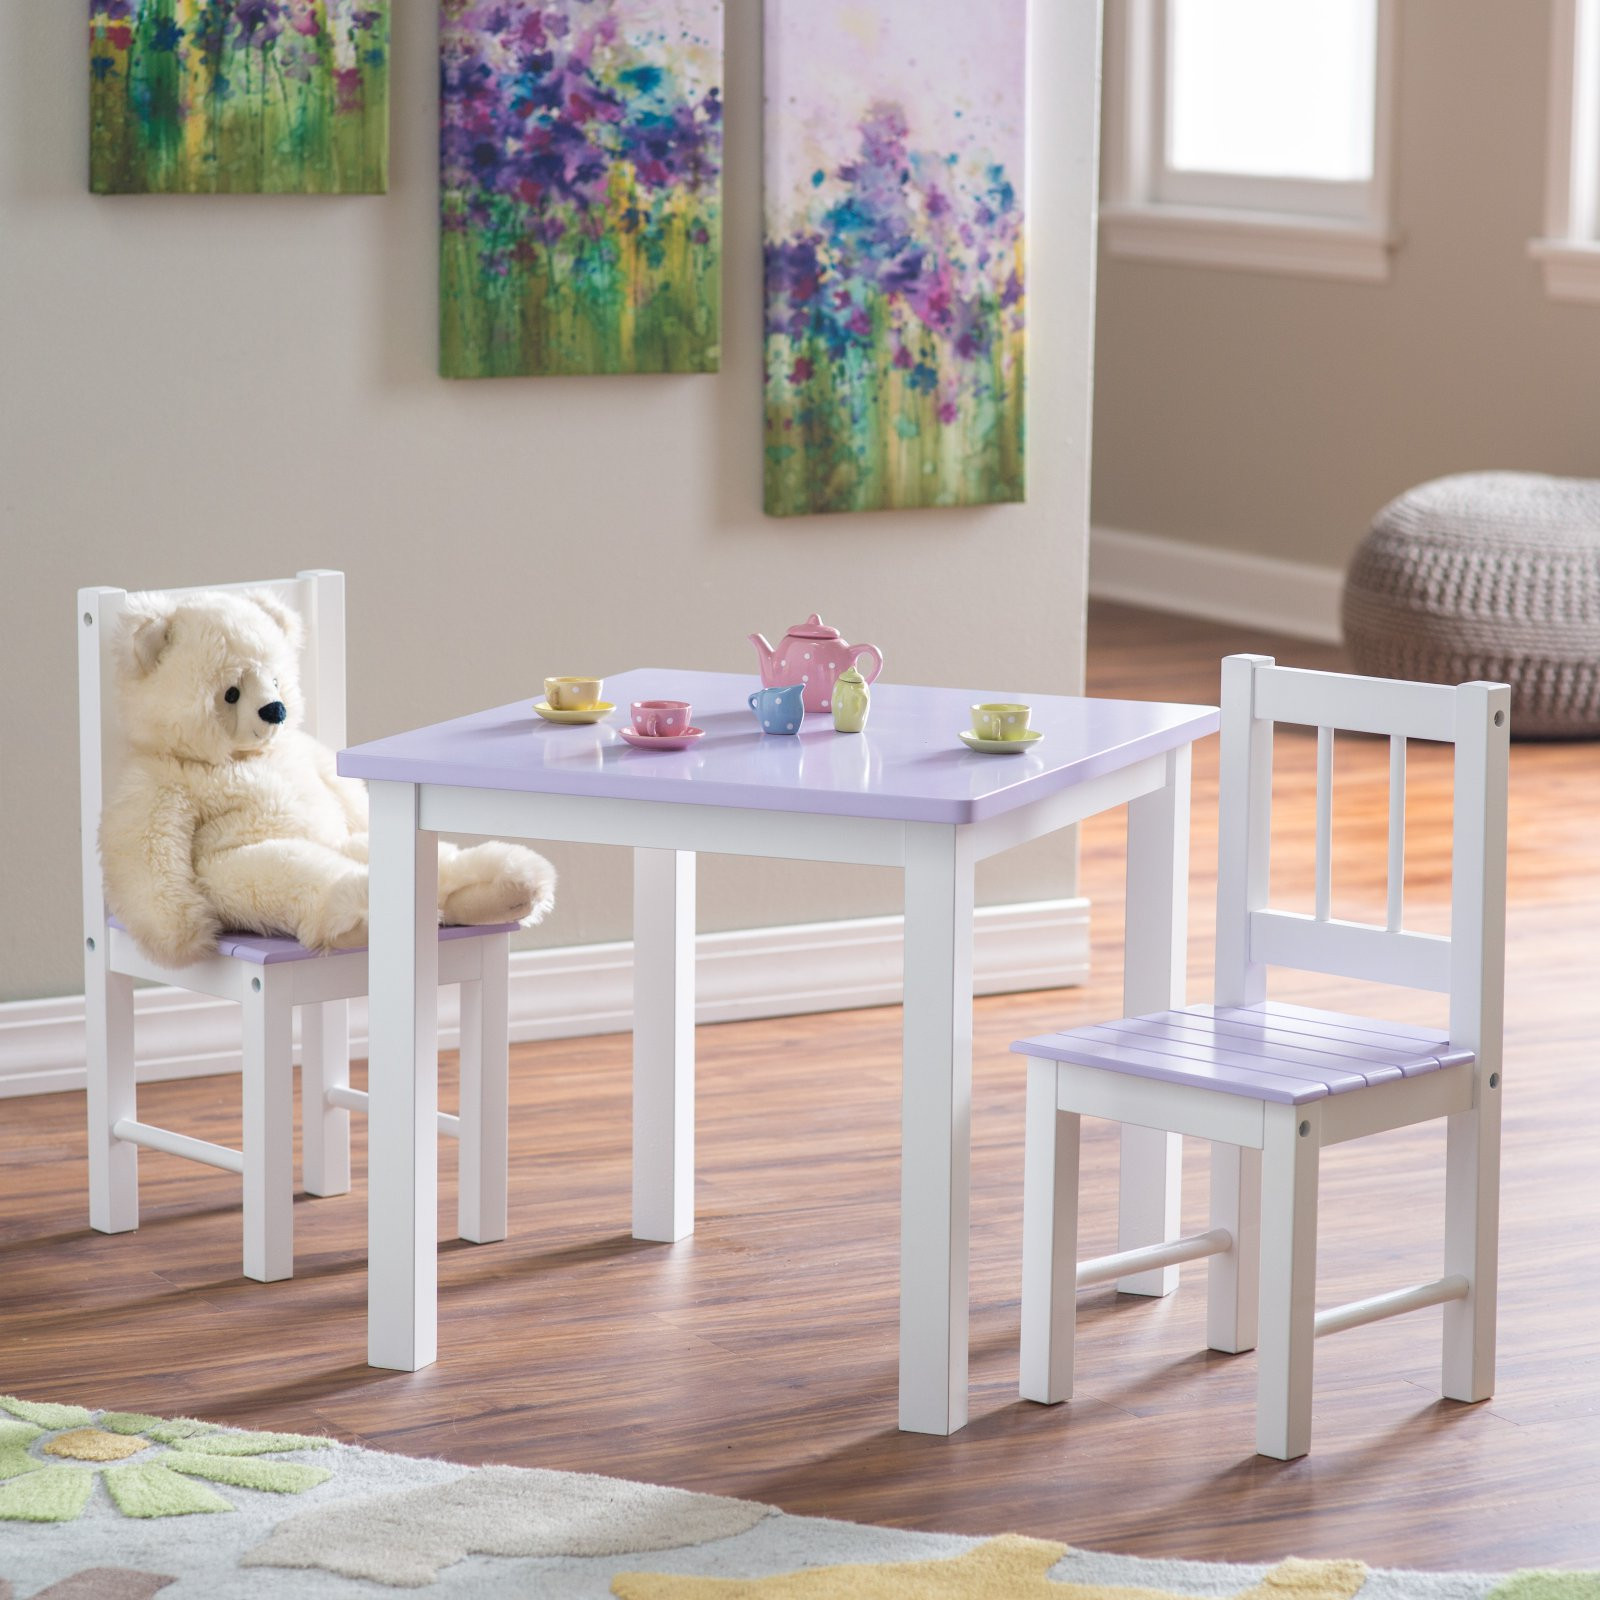 Walmart Kids Table Set
 Lipper Kids Small Lilac and White Table and Chair Set